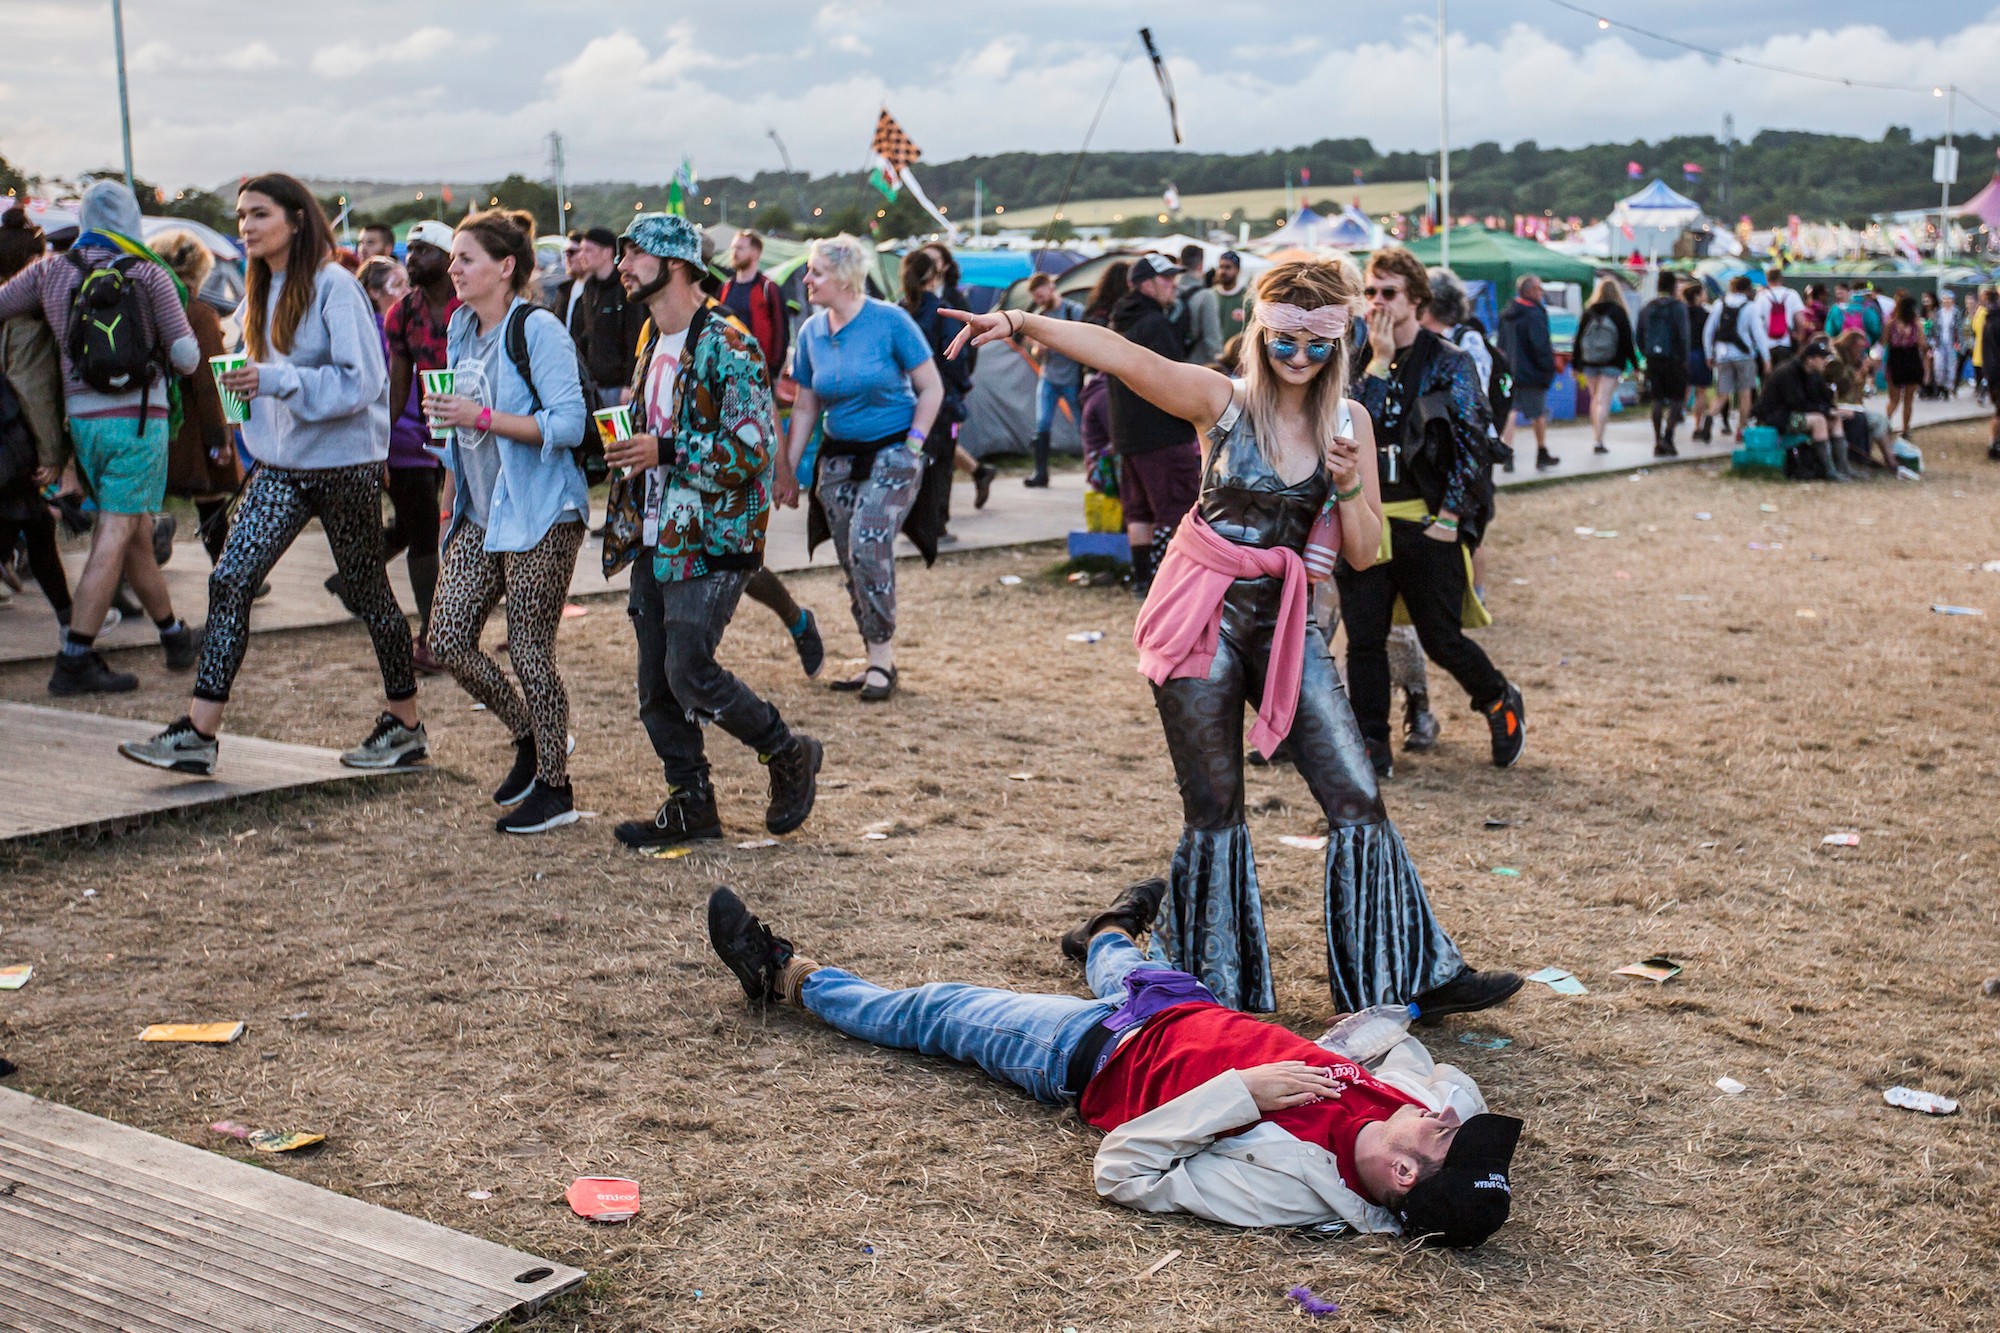 A Festival Guide for People Who Hate Festivals But Love Their Friends